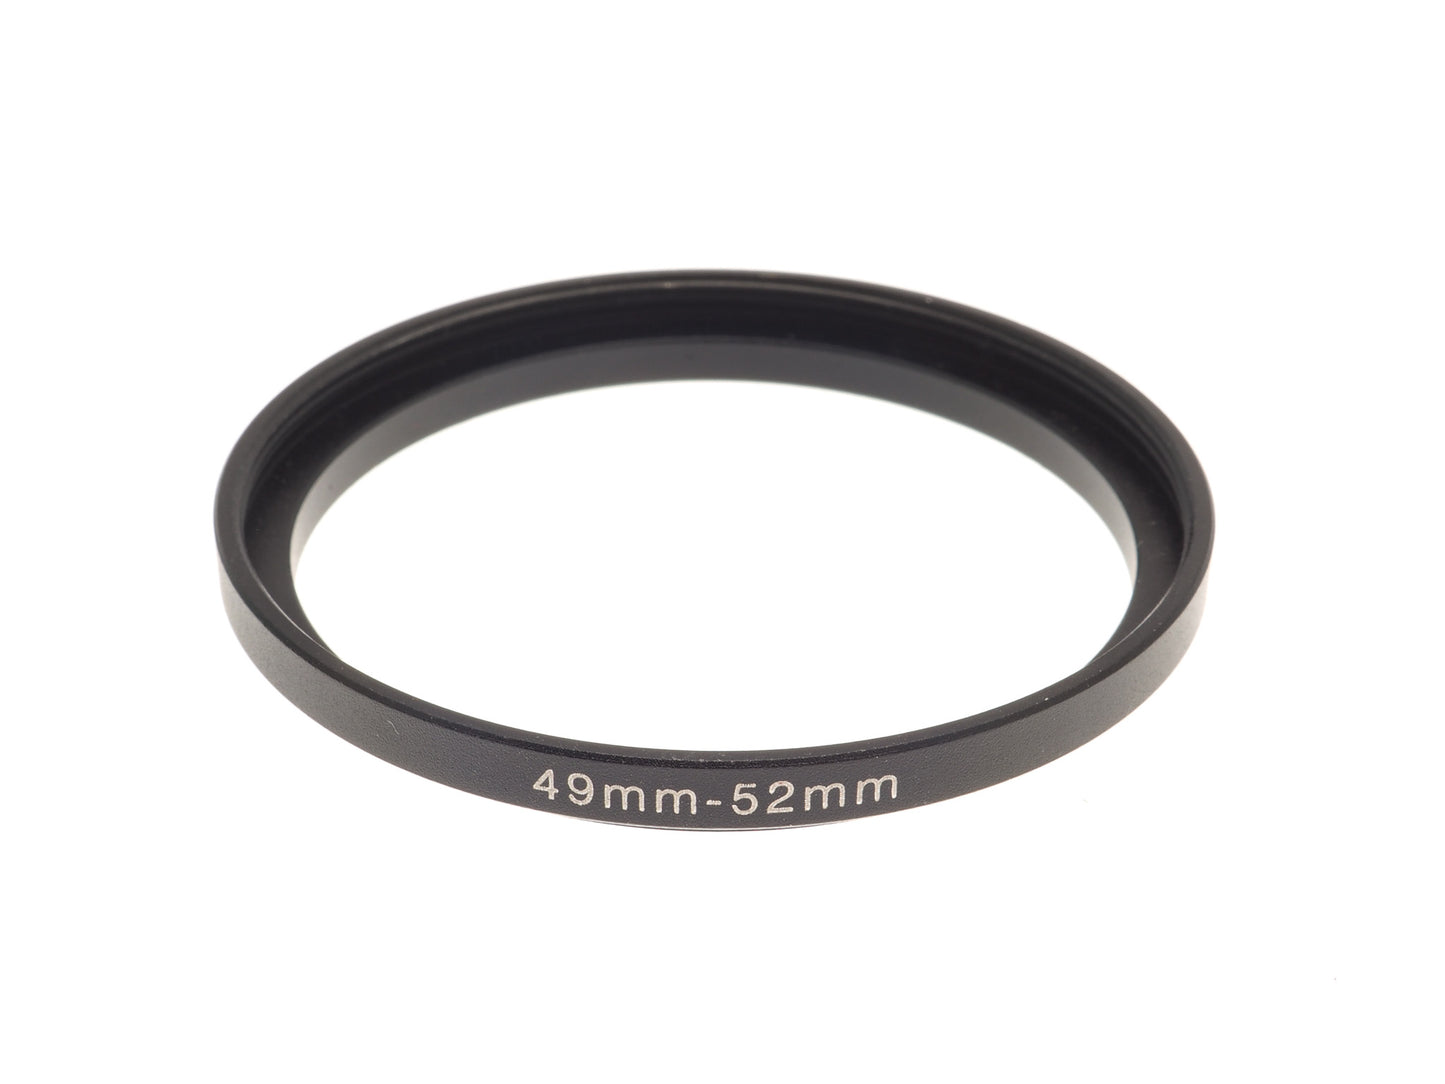 Generic 49mm - 52mm Step-Up Ring - Accessory